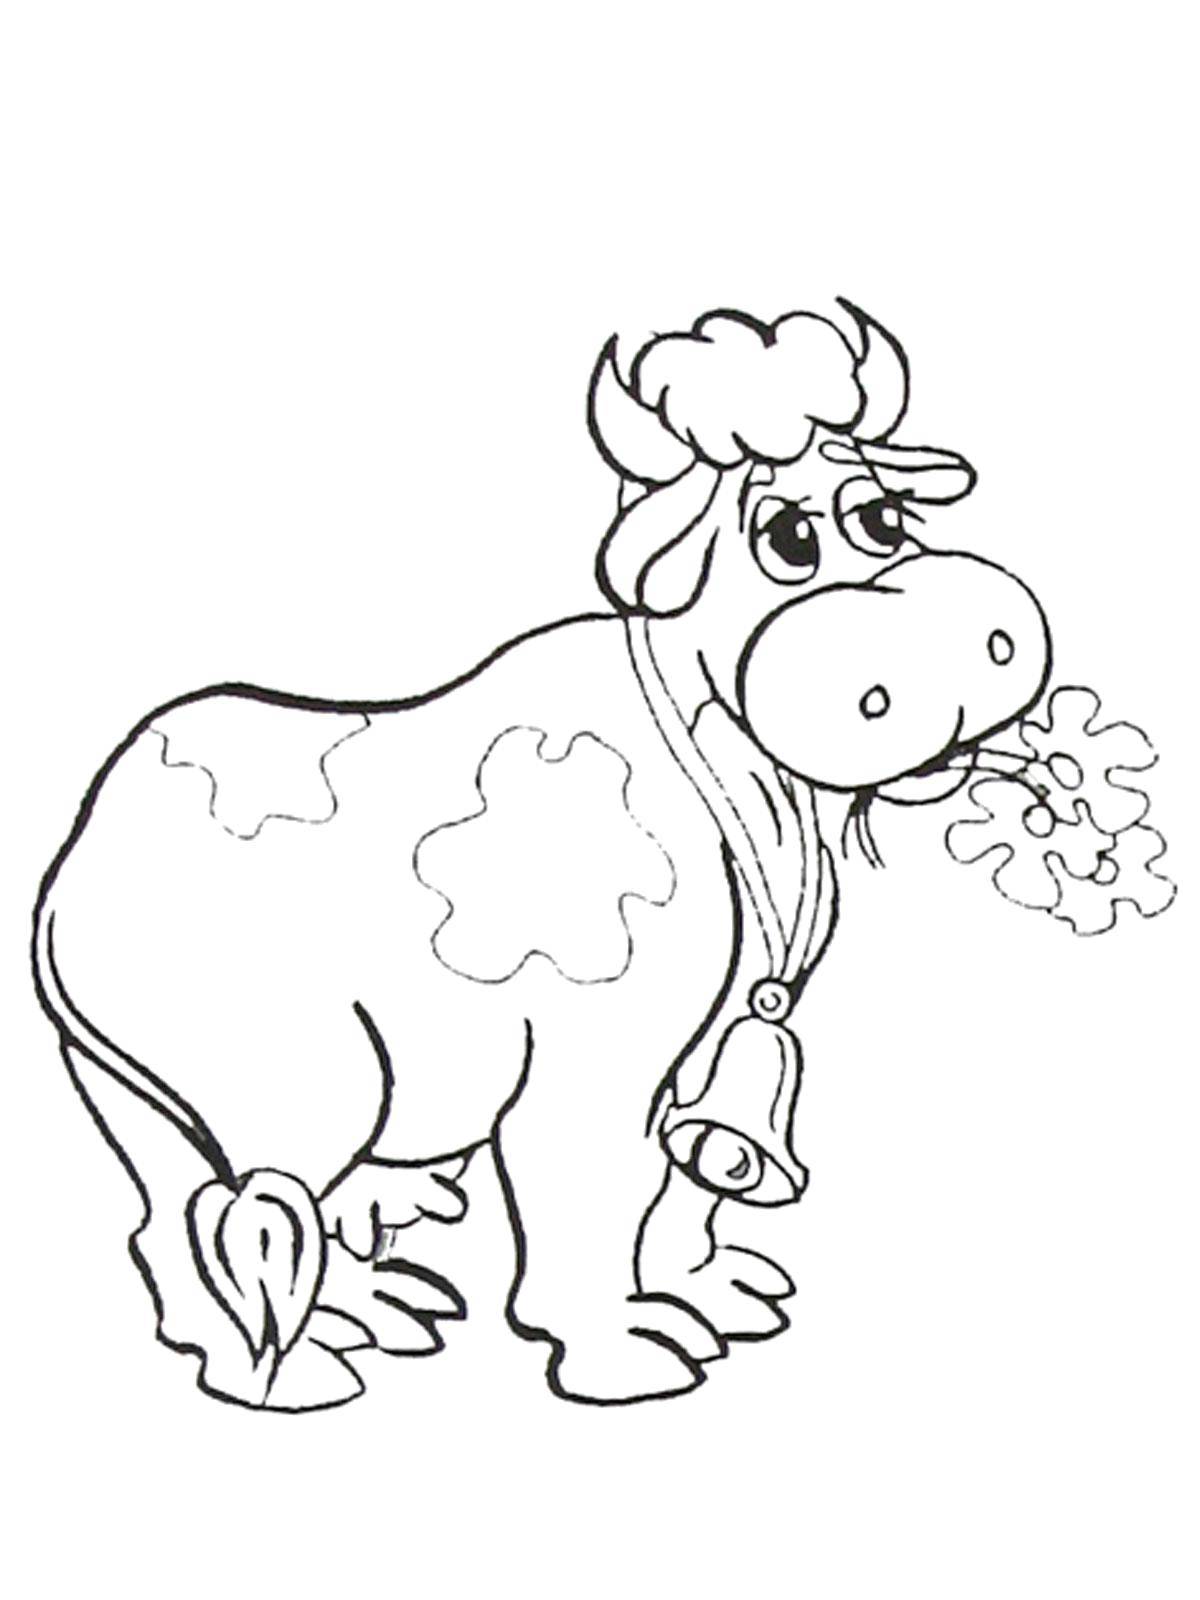 Coloring Cow with bell chewing flowers. Category Pets allowed. Tags:  Animals, cow.